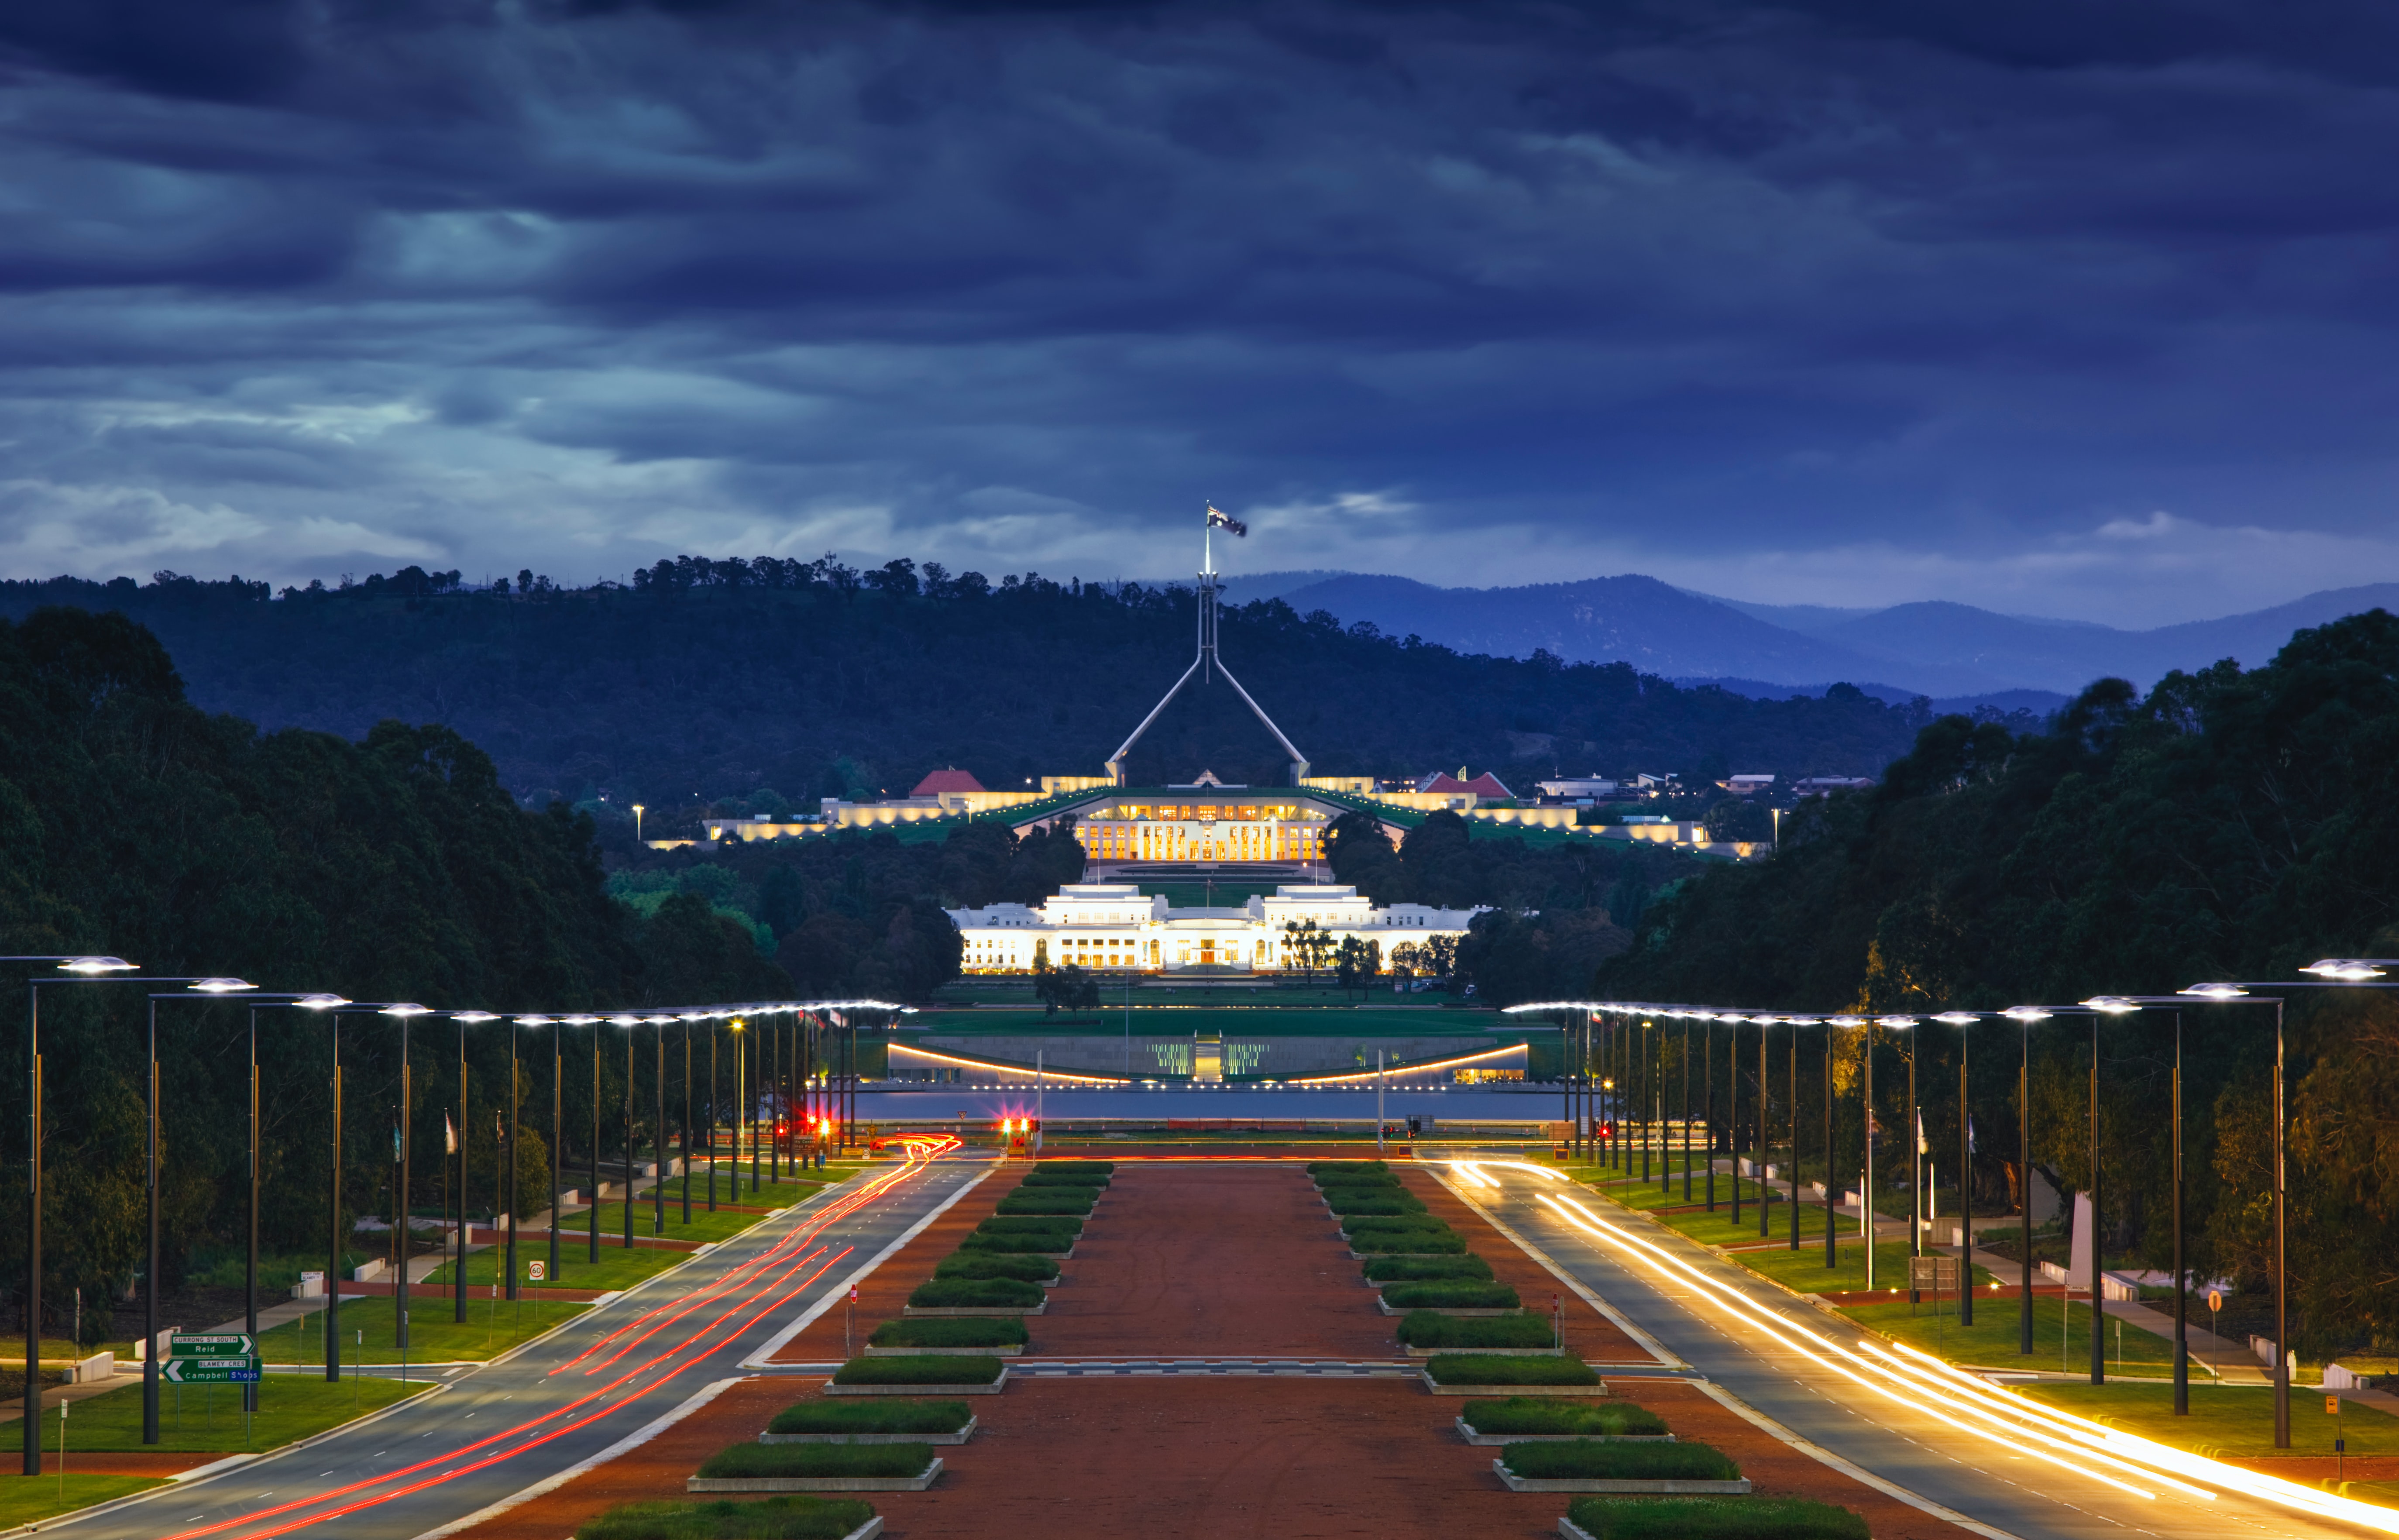 Parliament House (Australia) at dusk, shot from the perspective of the War Memorial. Lights line the avenue leading to Parliament House in the near distance.